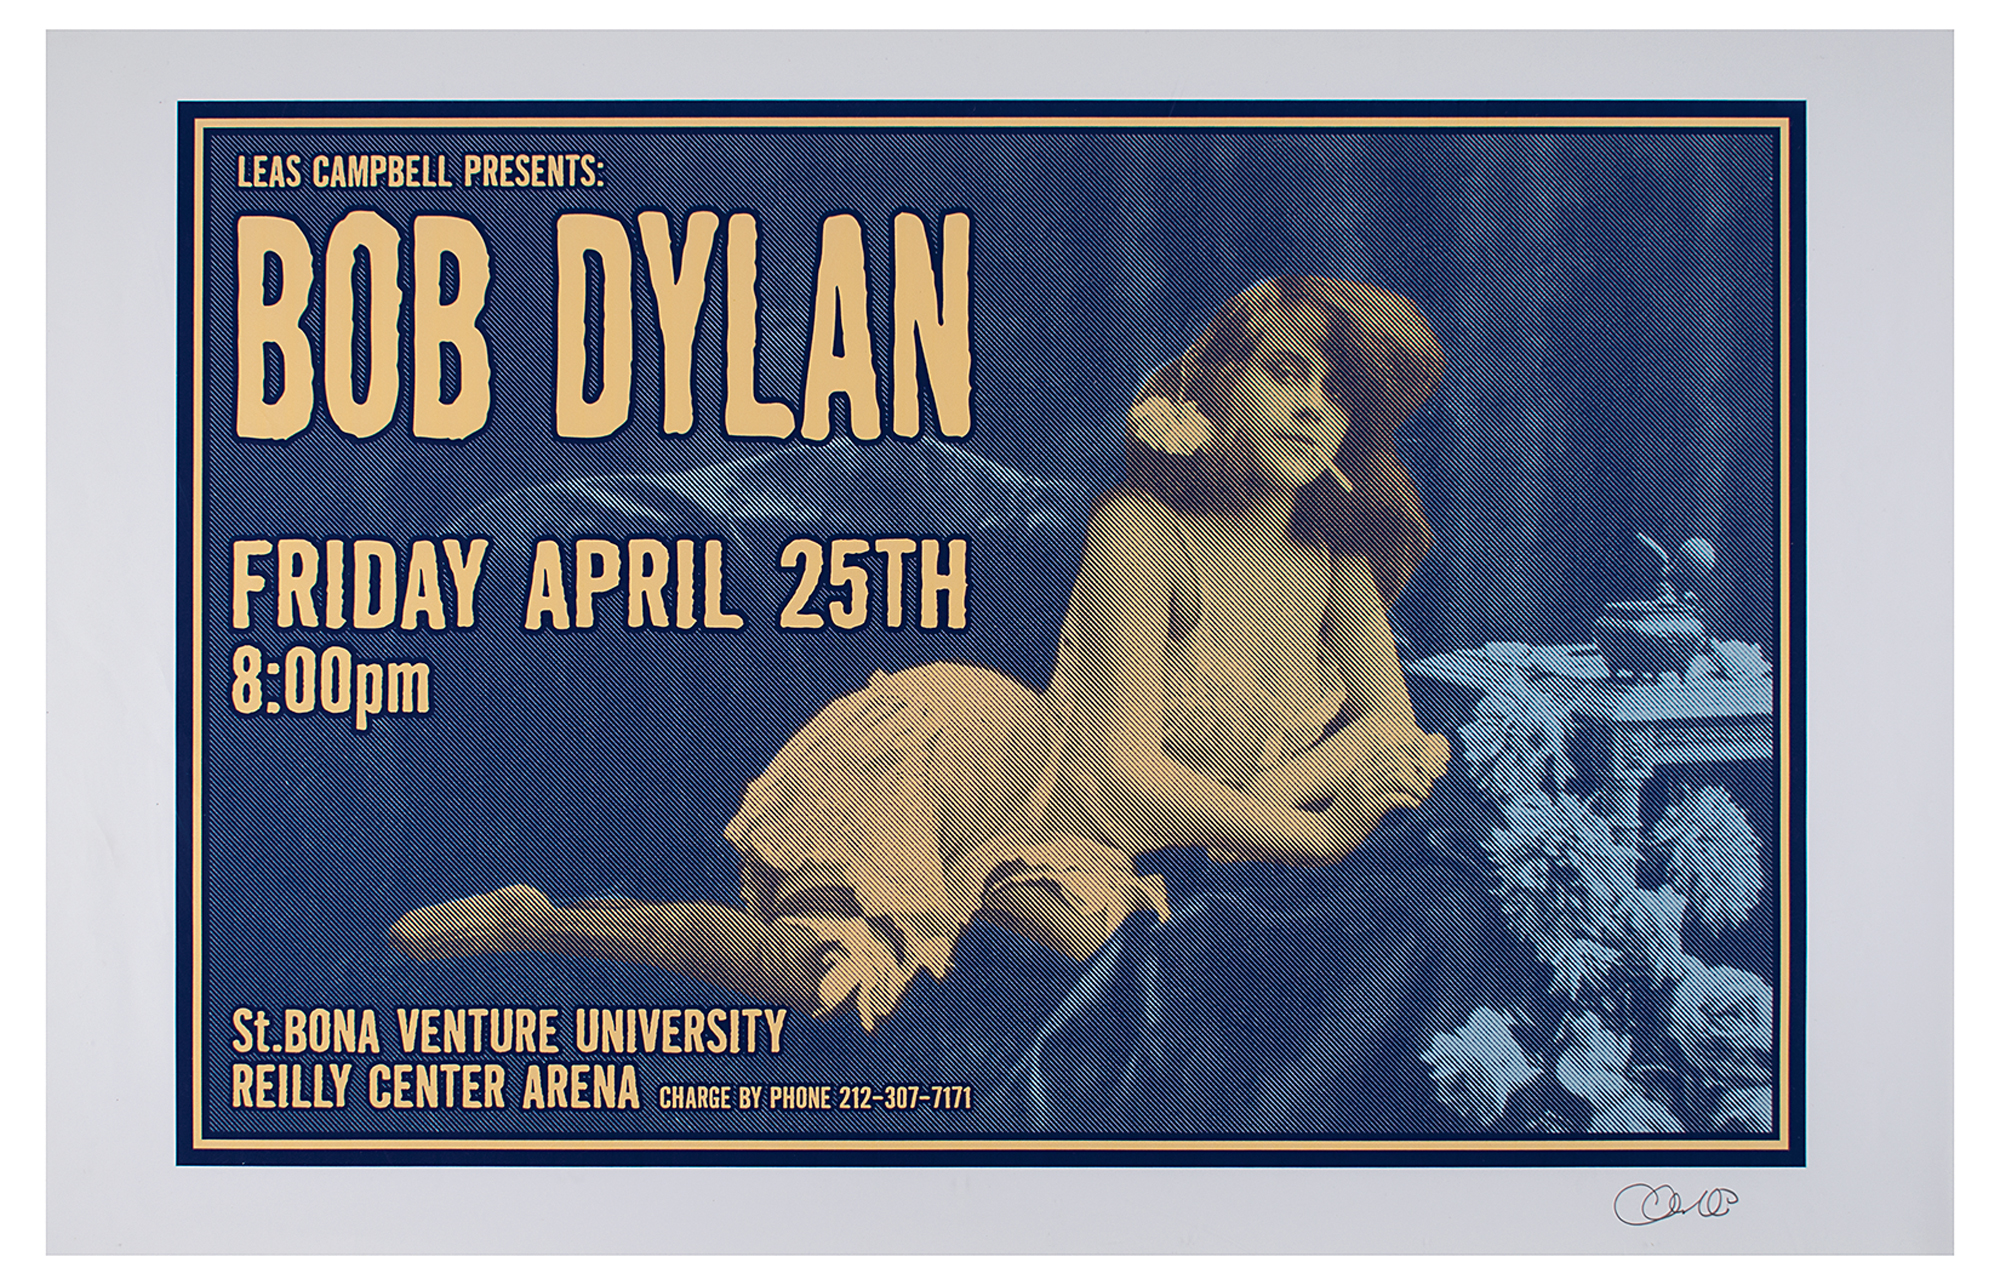 Lot #5076 Bob Dylan Poster by Uncle Charlie Hardwick